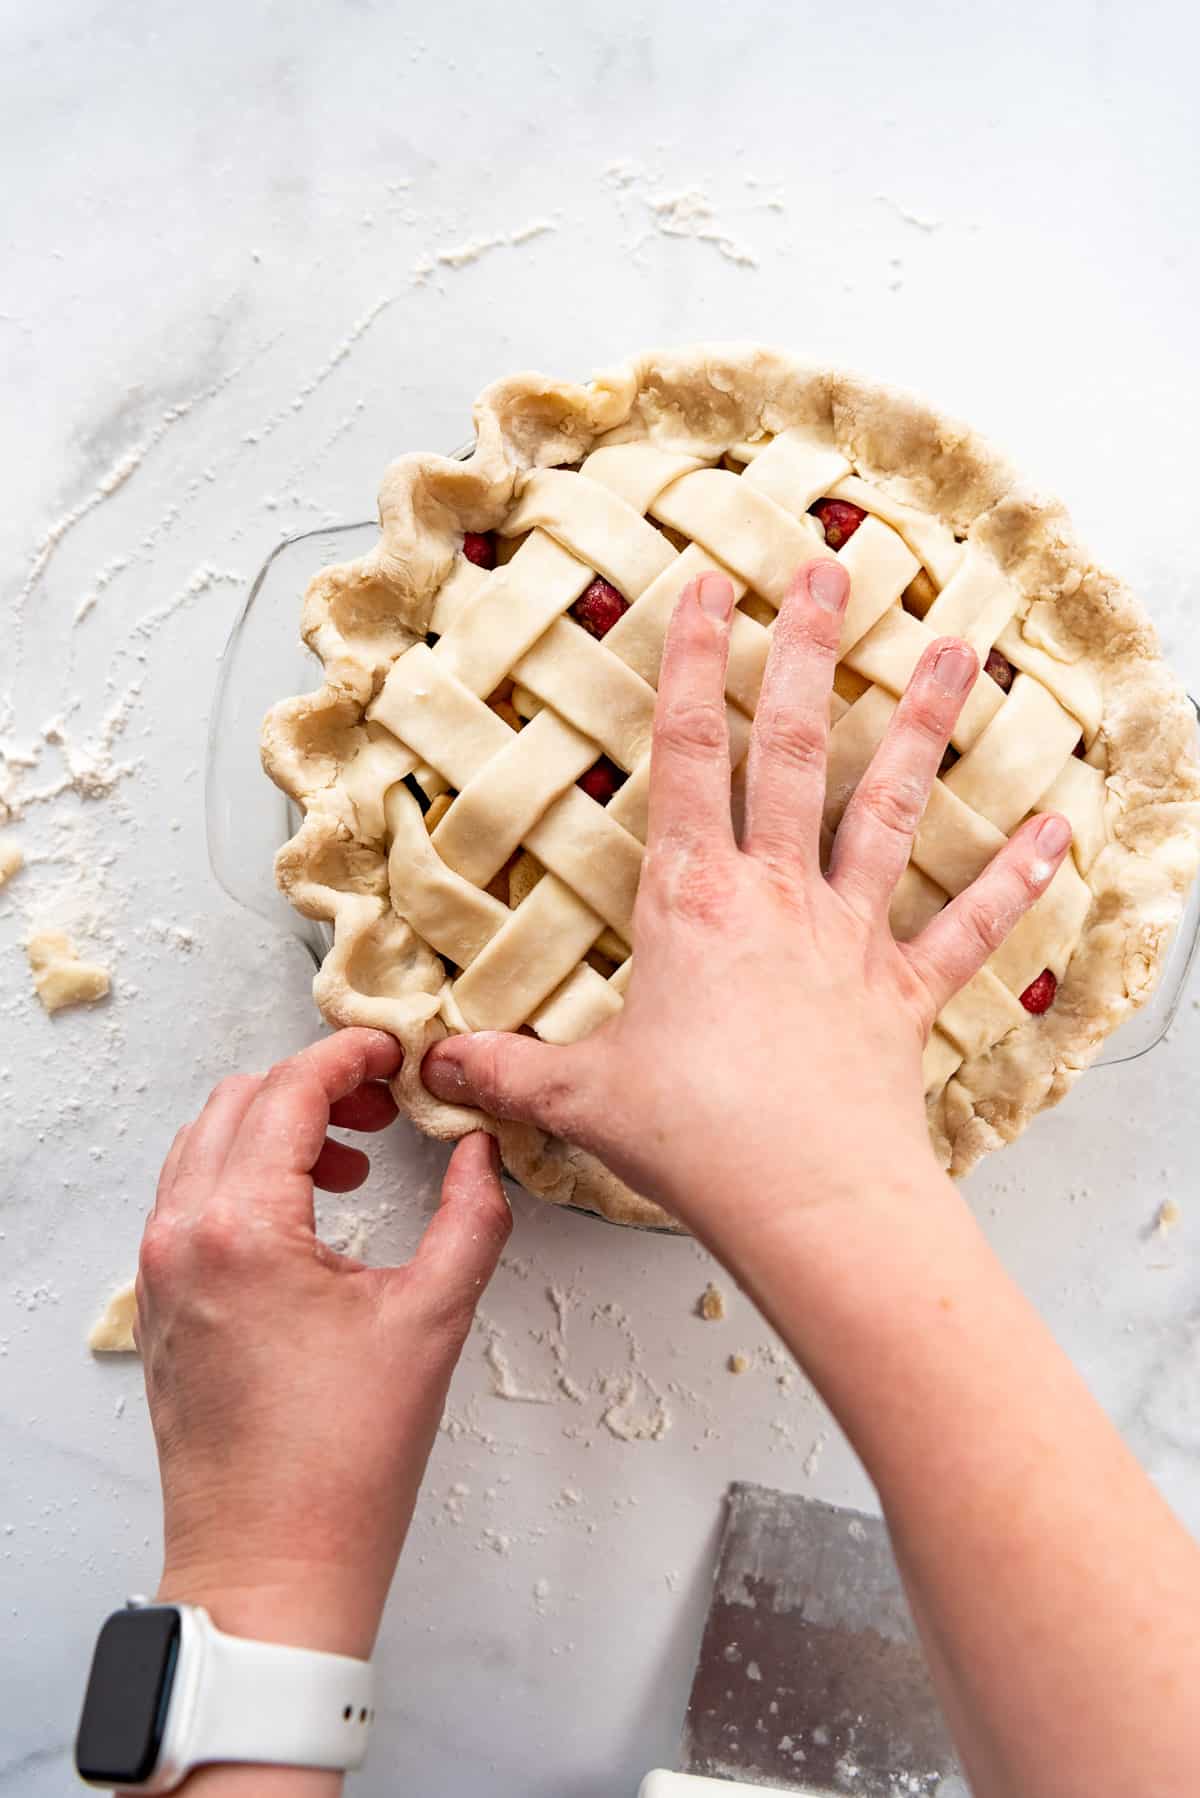 Thumb and forefinger being used to create a decorative crimped edge on a homemade pie crust with lattice design.